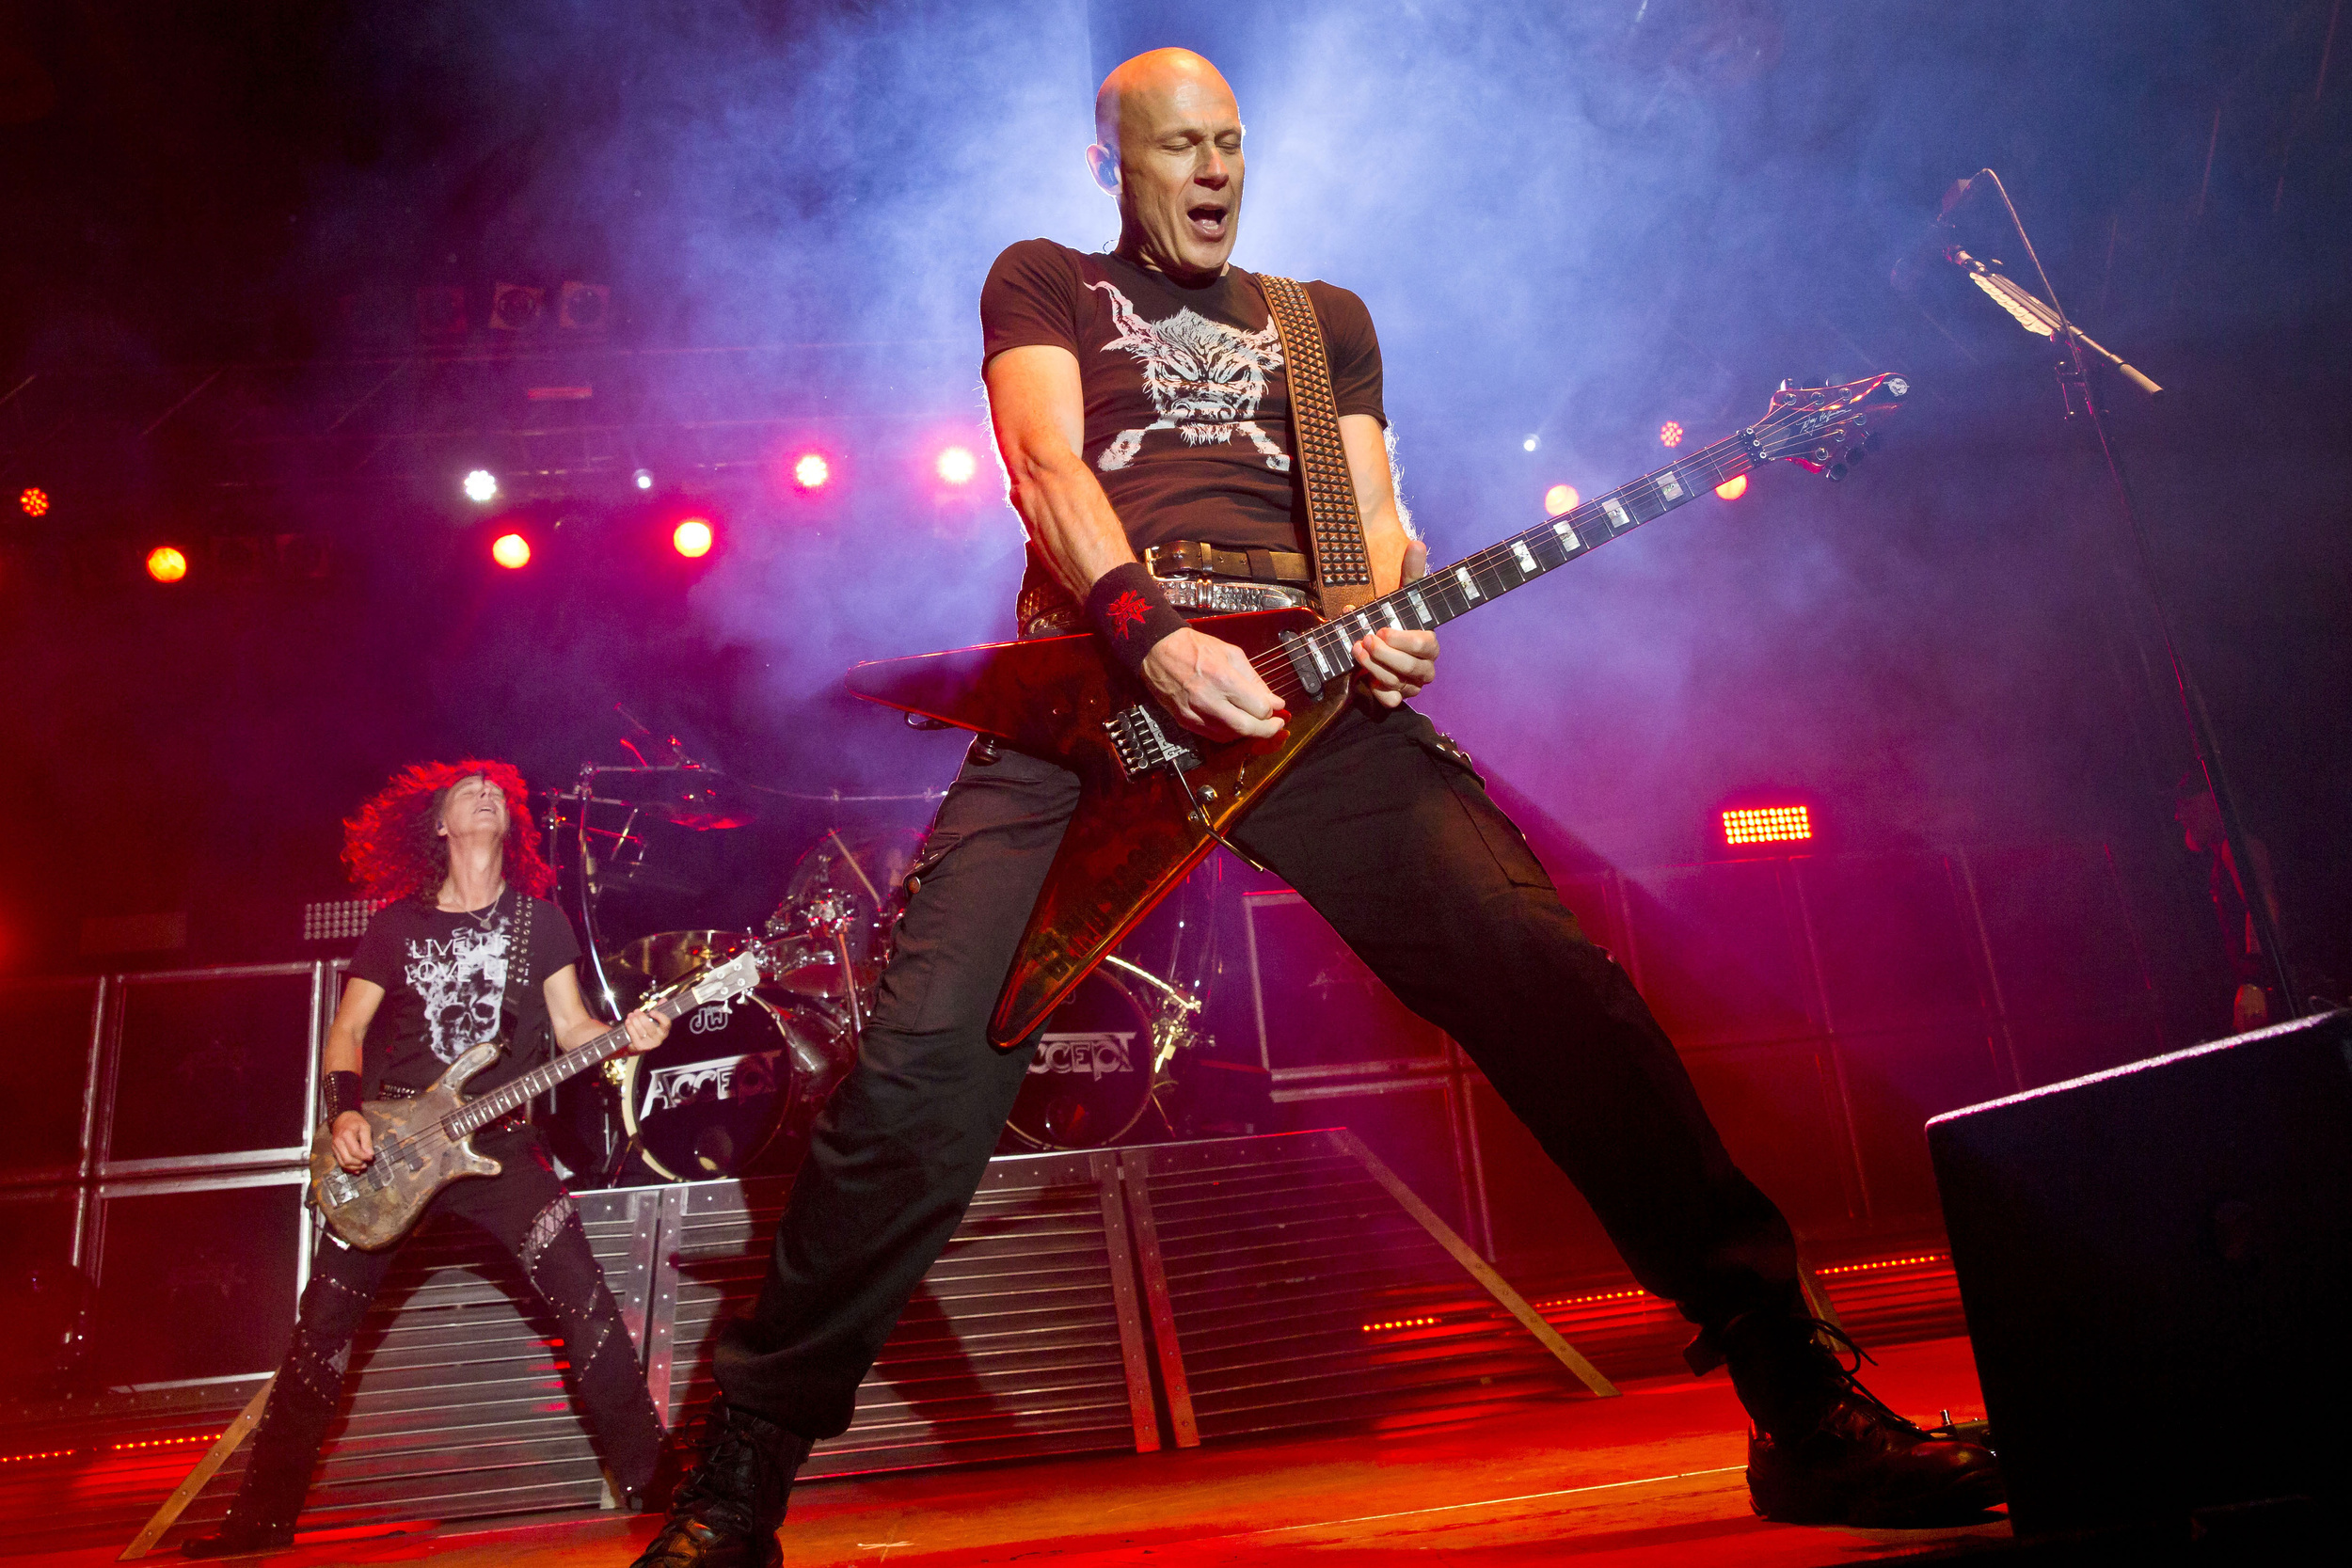 <p>German metal band Accept is pretty close to the definition of "consistent", with the exception of 1994's <em>Death Row </em>and 1996's <em>Predator</em>. To be fair, the mid-'90s were pretty hard on any metal band not signed to Roadrunner Records. Ever since the band, led by guitarist Wolf Hoffmann, returned in 2009 they've been releasing consistently good albums. <em>Humanoid</em>'s title track has been released ahead of the album, and sounds every bit as good as their classic material.</p><p>You may also like: <a href='https://www.yardbarker.com/entertainment/articles/the_25_best_anime_movies_030624/s1__38909412'>The 25 best anime movies</a></p>